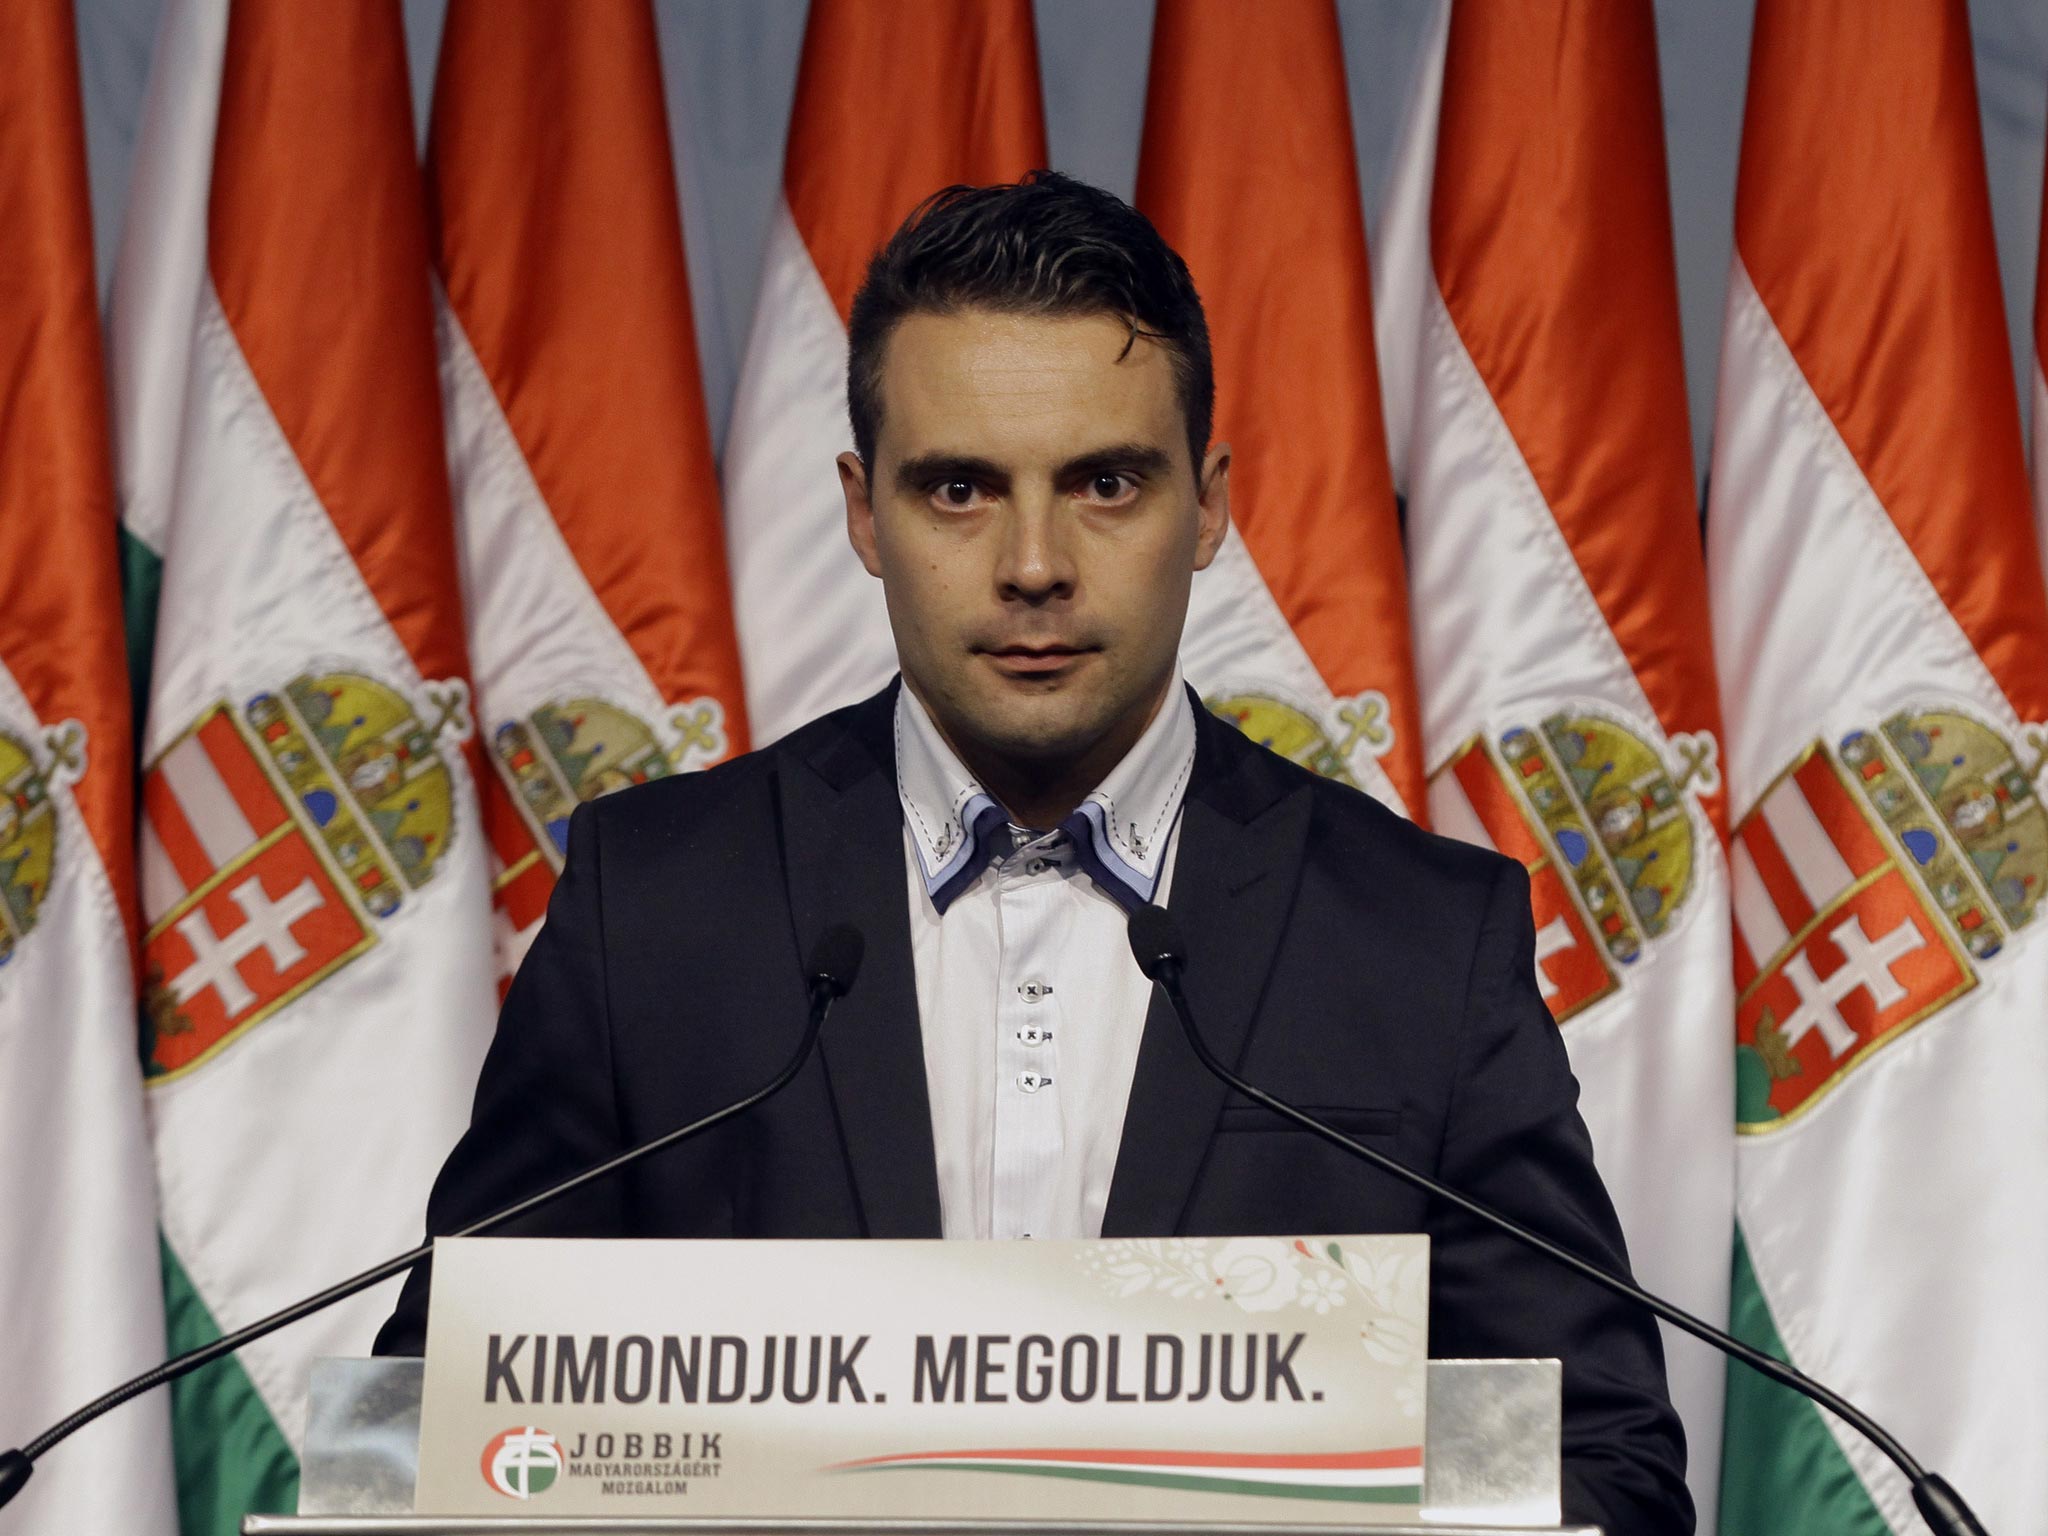 Gabor Vona, leader of the far-right Jobbik party, saw significant gains